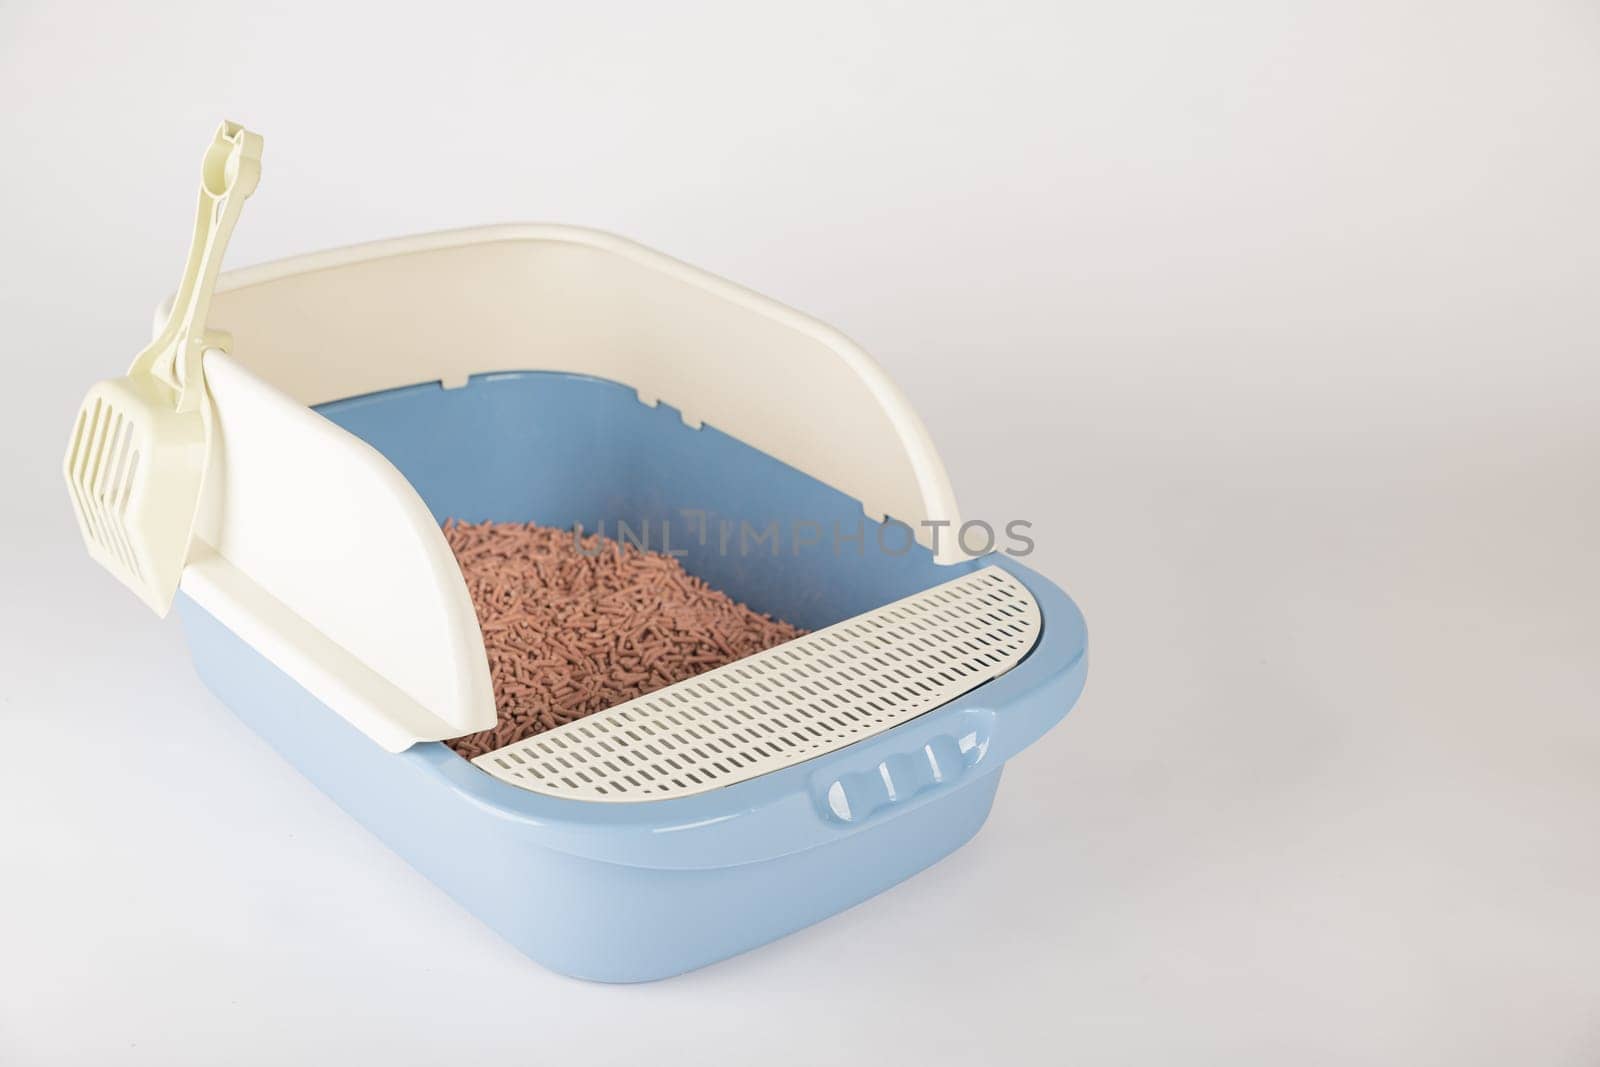 Promote cleanliness and hygiene with an isolated plastic cat litter toilet tray and scoop on a white background. A must-have for your pet's well-being. by Sorapop